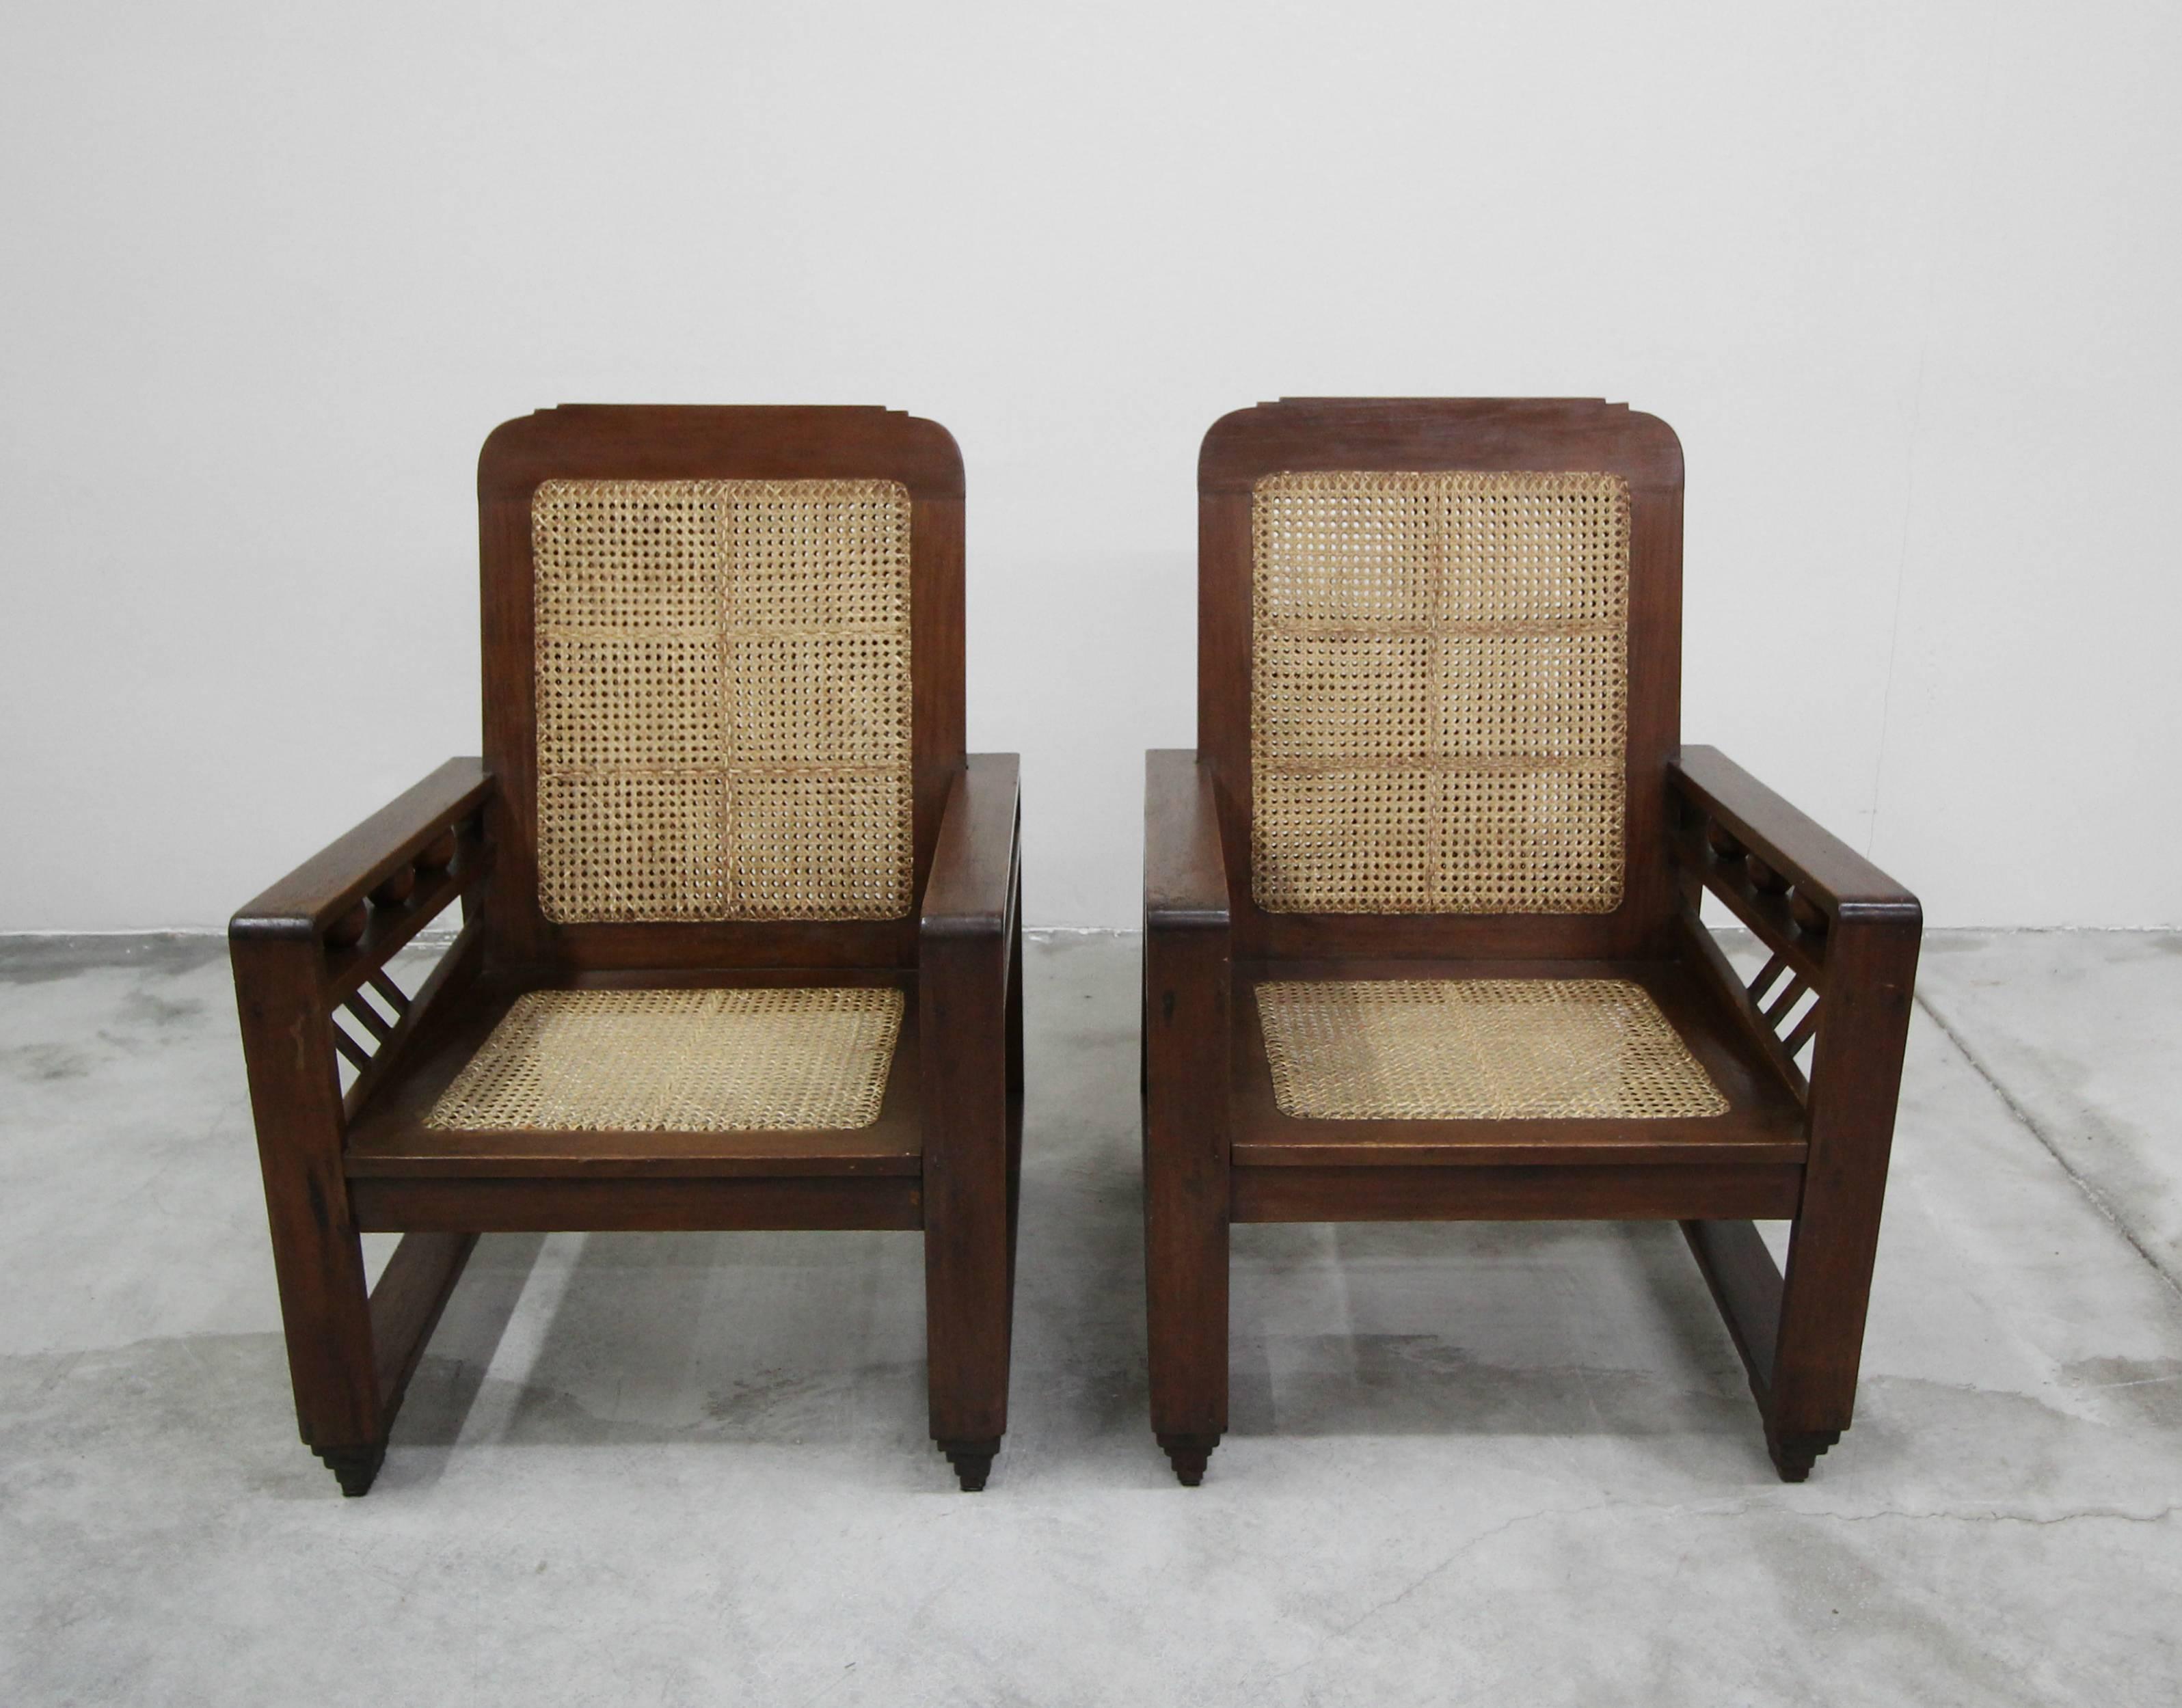 Pair of Antique French Art Deco Solid Wood Lounge Chairs with Cane Backs & Seats 2